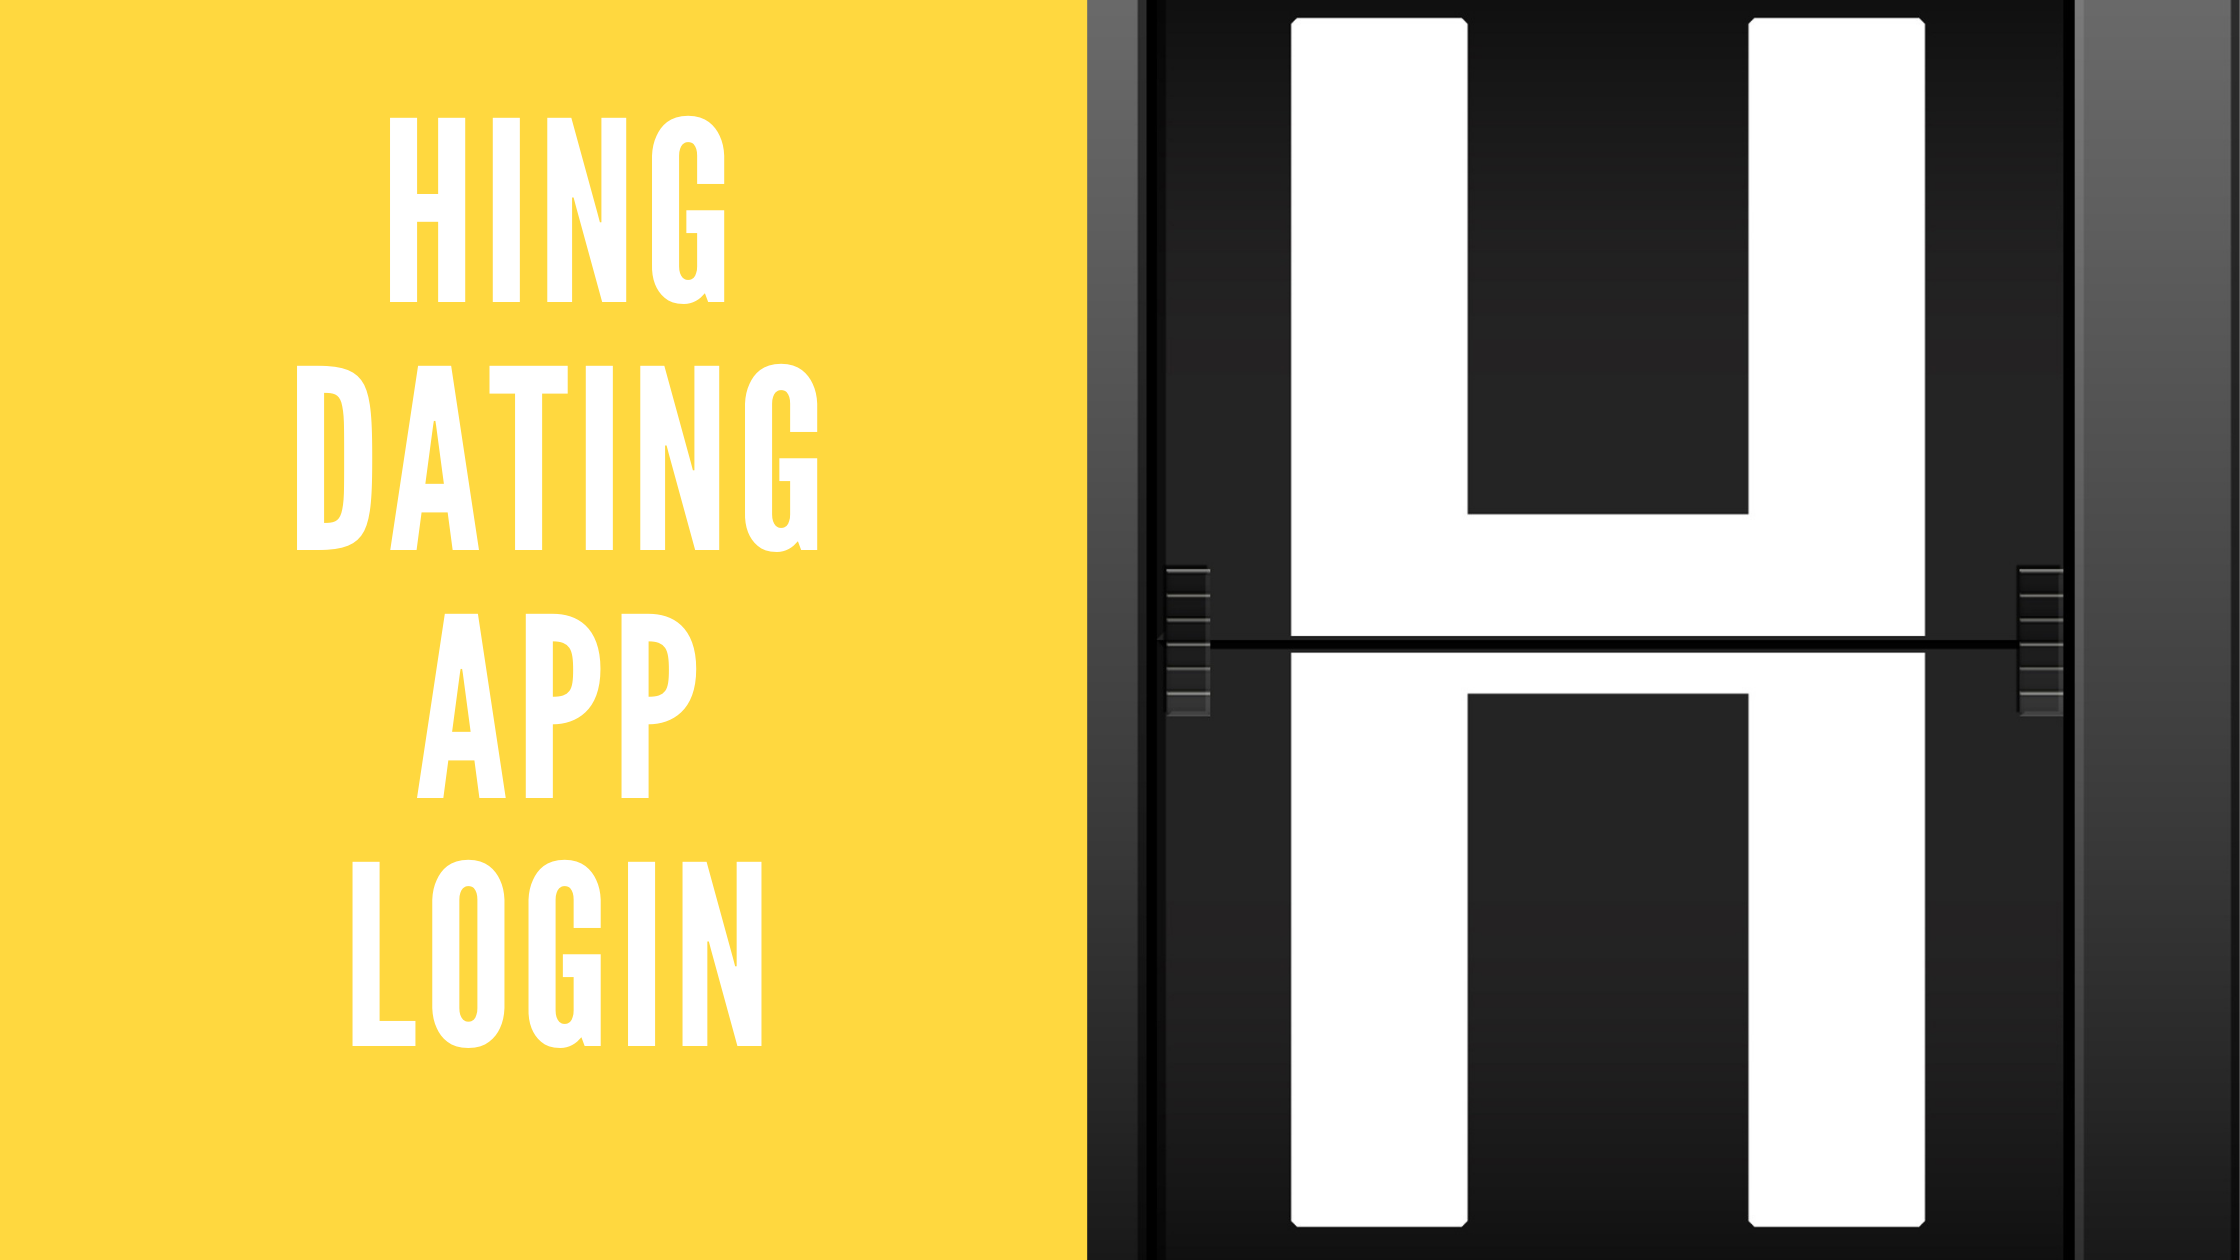 How To Login To Hinge